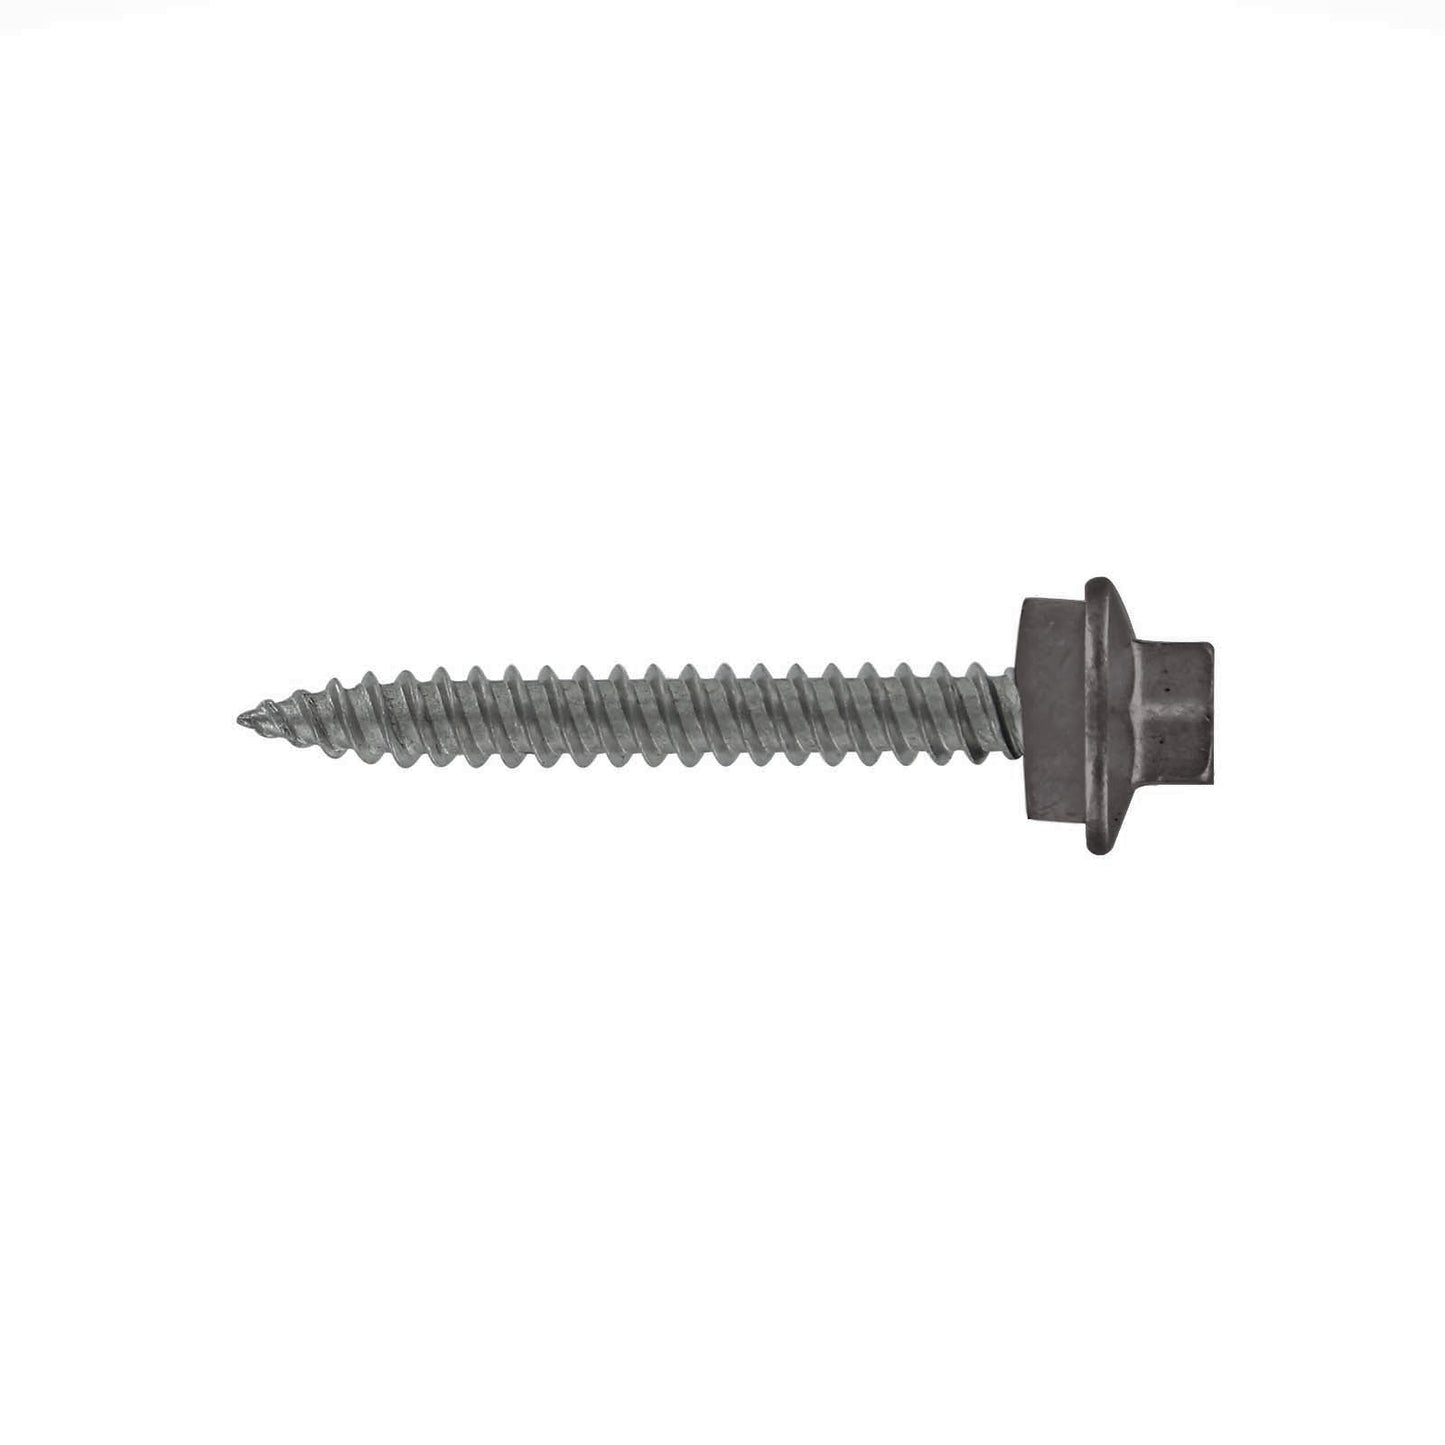 #10 x 112 inch SS Woodbinder Metal Roofing Screw Charcoal Gray Pkg 250